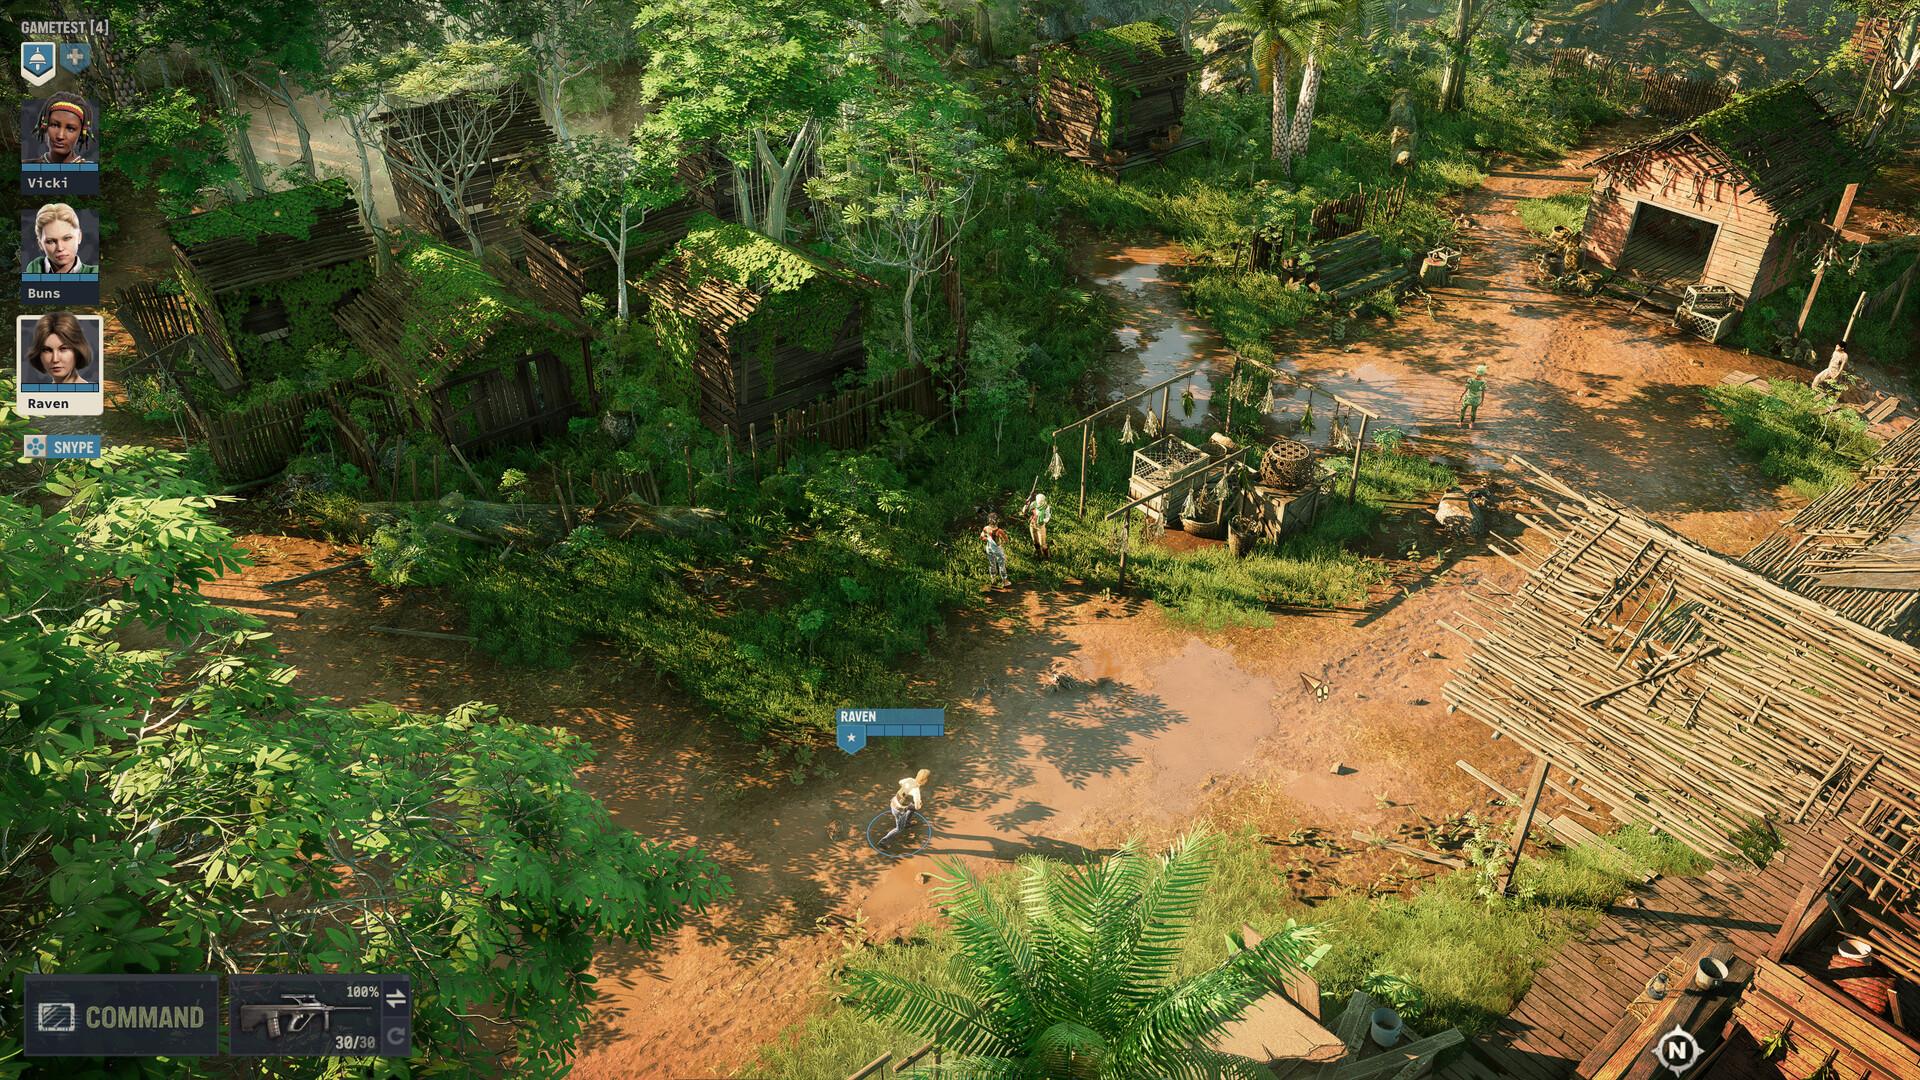 Screenshot №3 from game Jagged Alliance 3